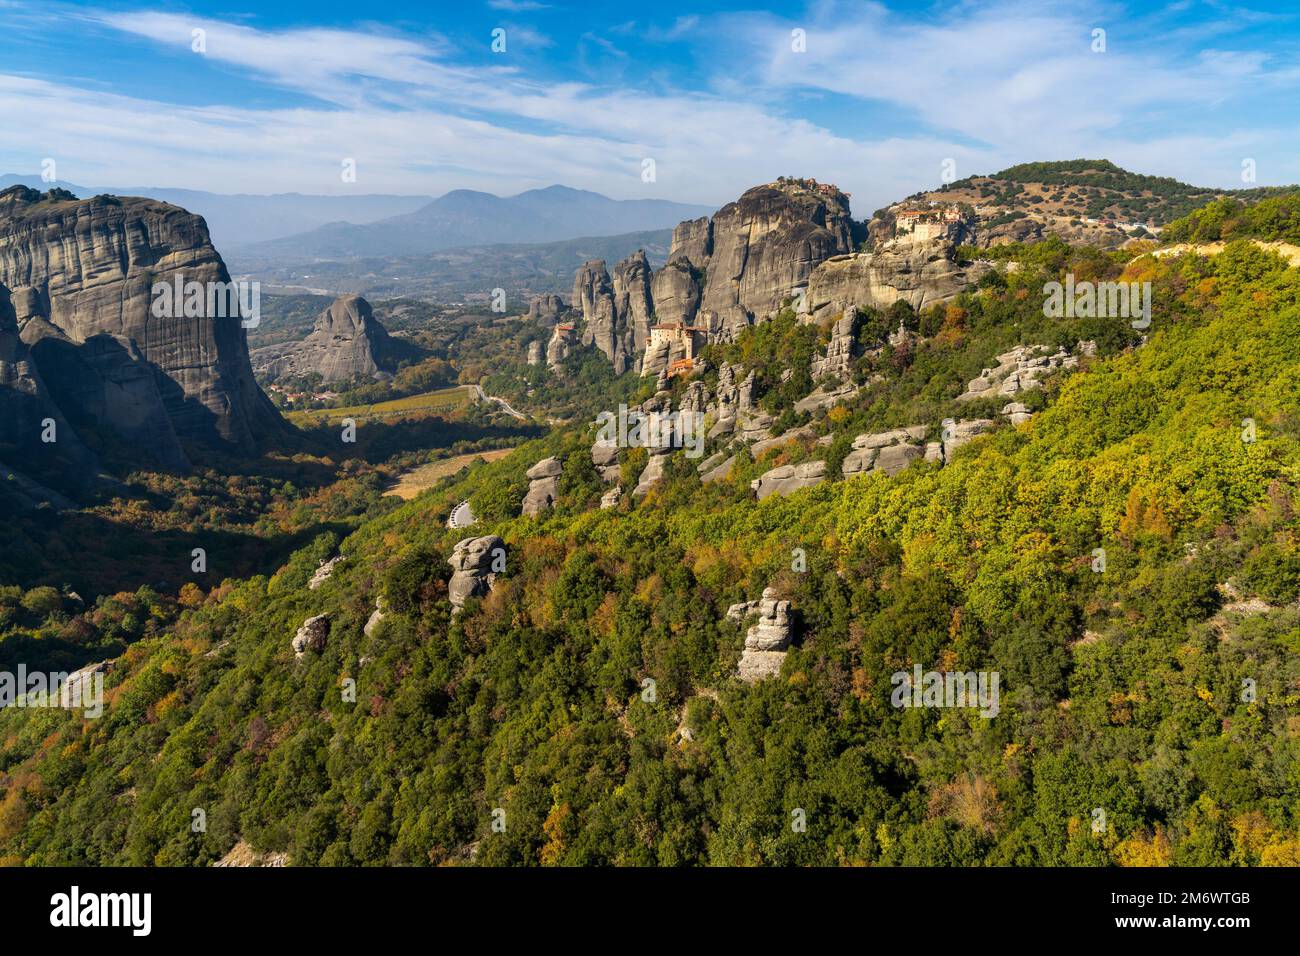 A landscape of the Meteora rock formations with the famous monasteries on the hilltops Stock Photo